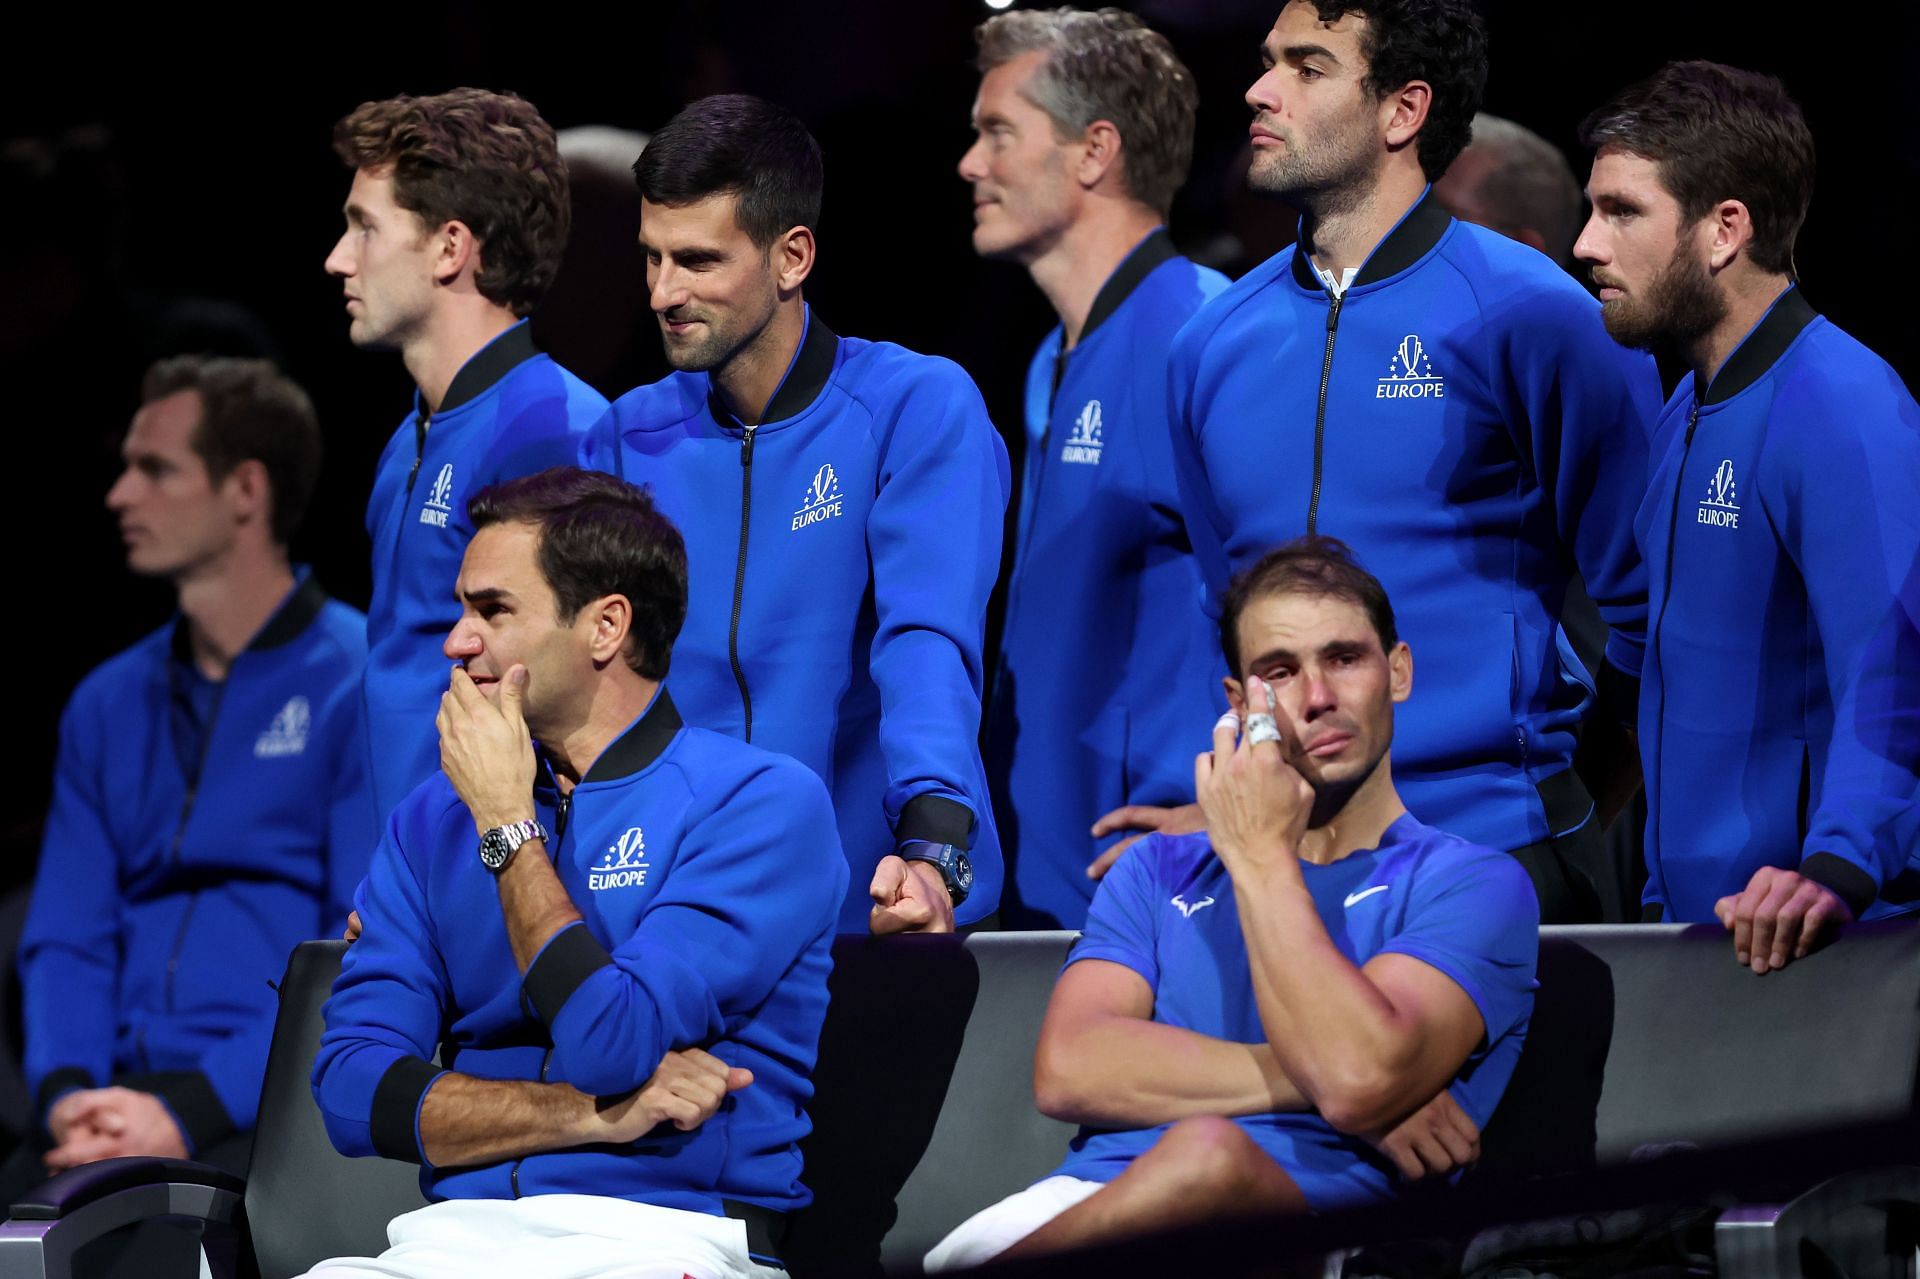 Rafael Nadal (first row, rightmost) last saw action for Team Europe in the Laver Cup where he shed tears for retiring friend and rival Roger Federer.